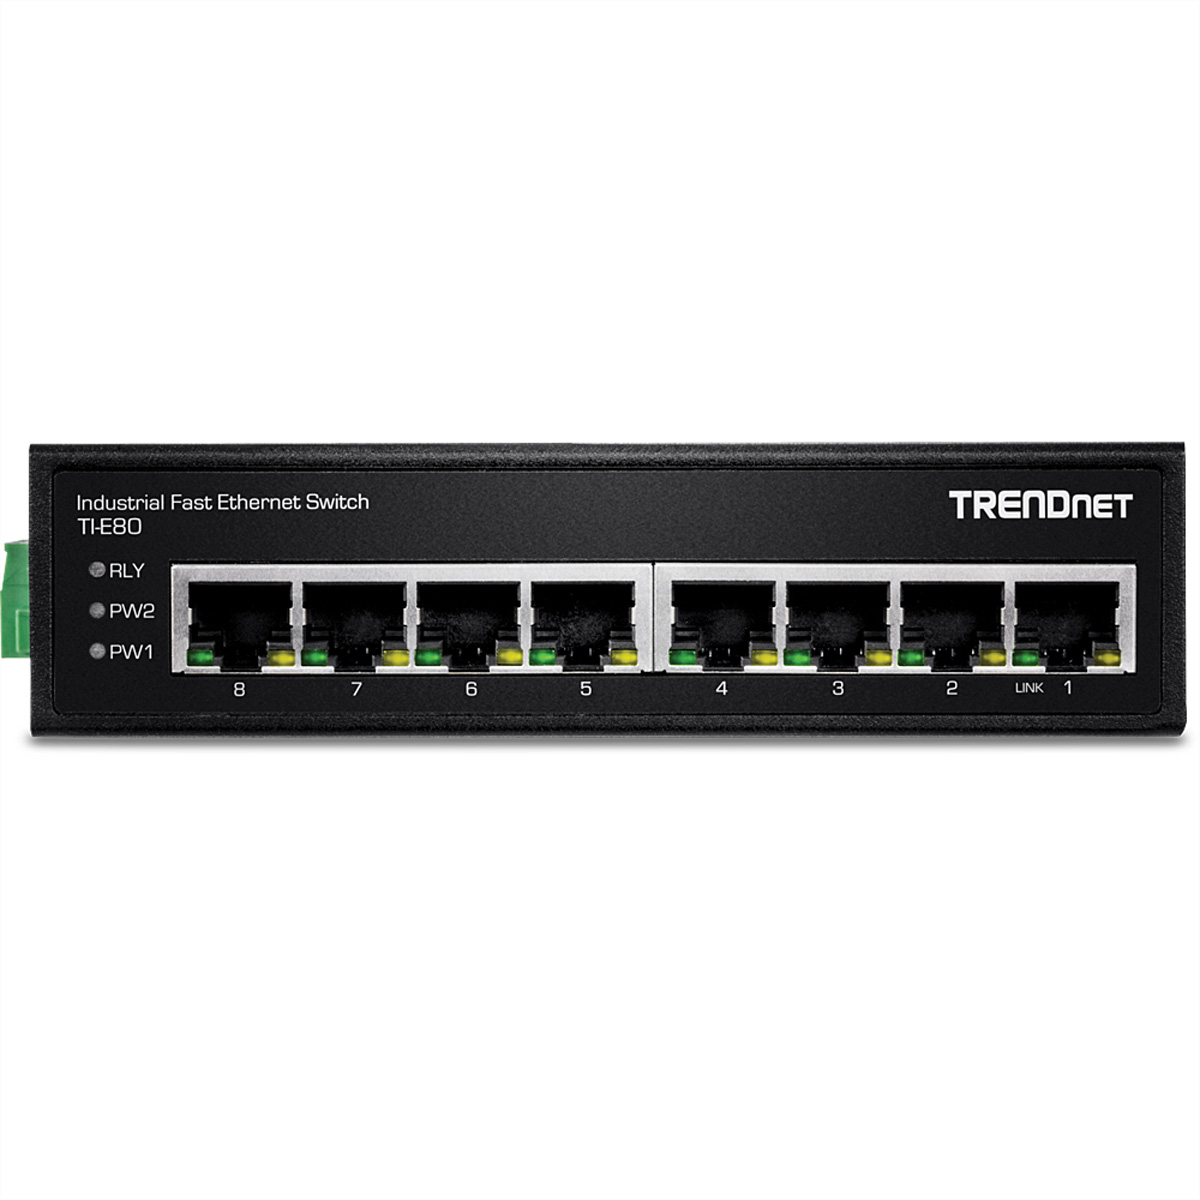 TRENDNET TI-E80 Industrial Fast 8-Port Networking Switch Ethernet DIN-Rail Industrial